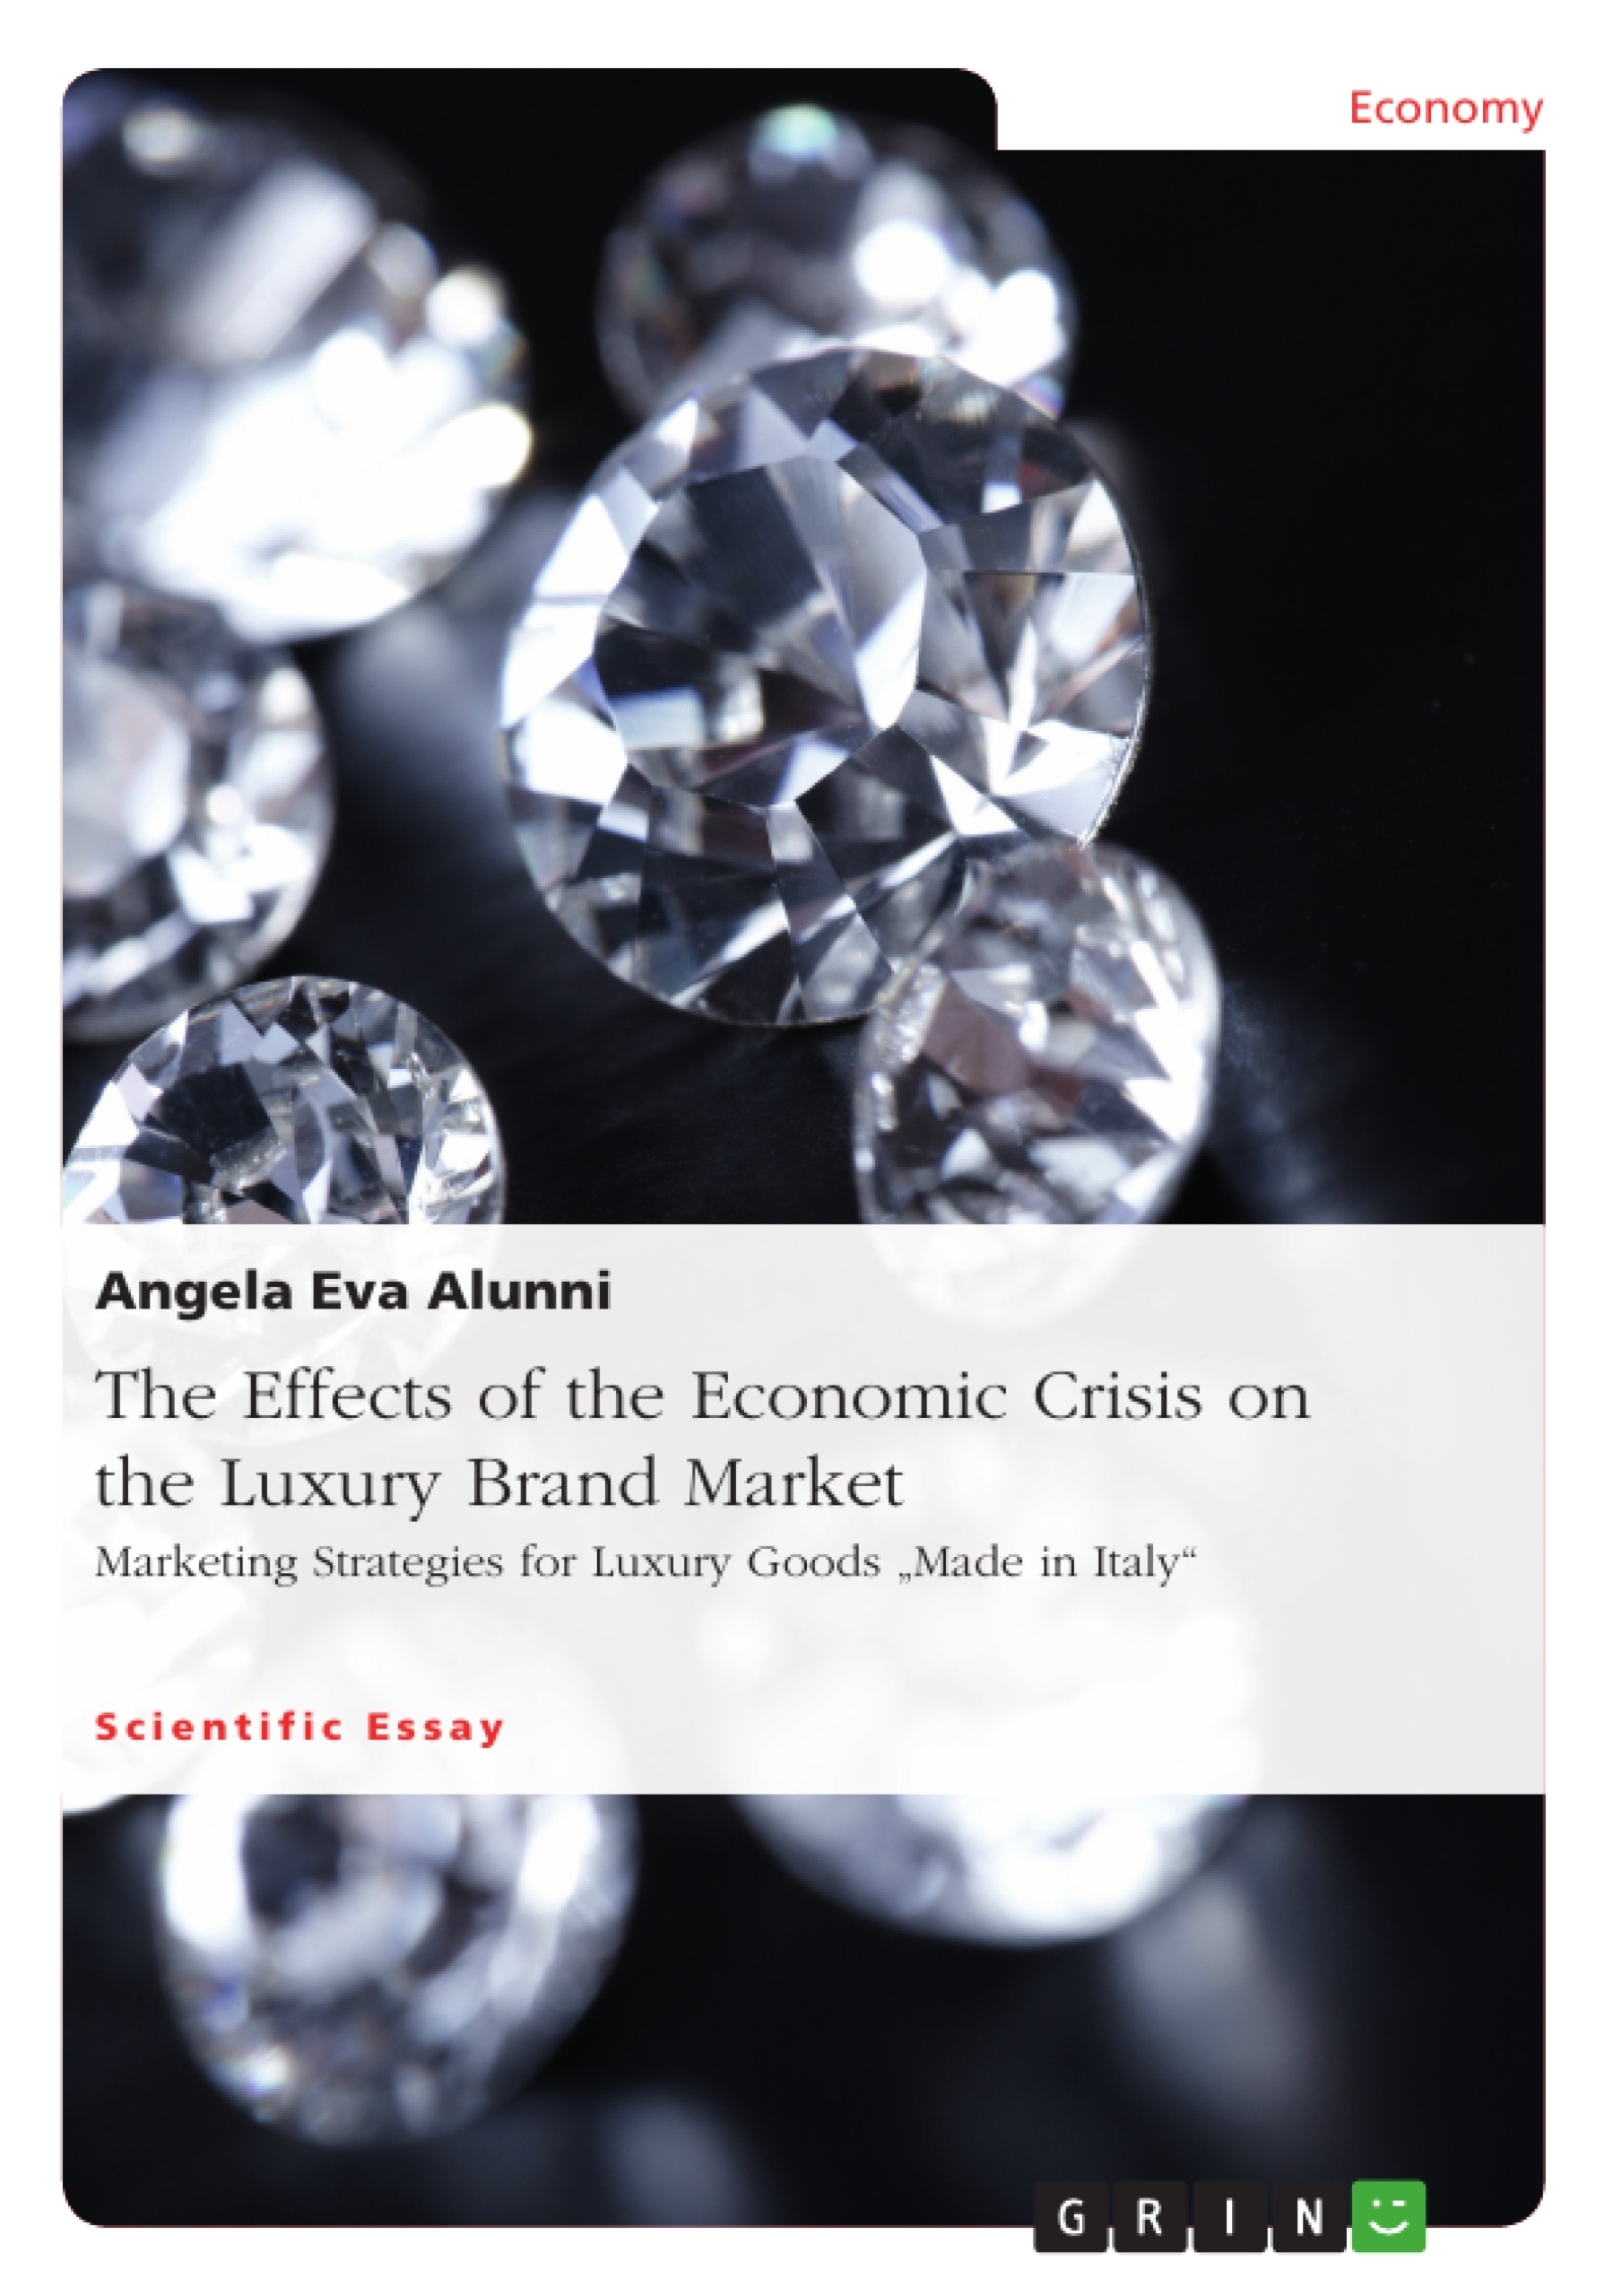 Title: The Effects of the Economic Crisis on the Luxury Brand Market